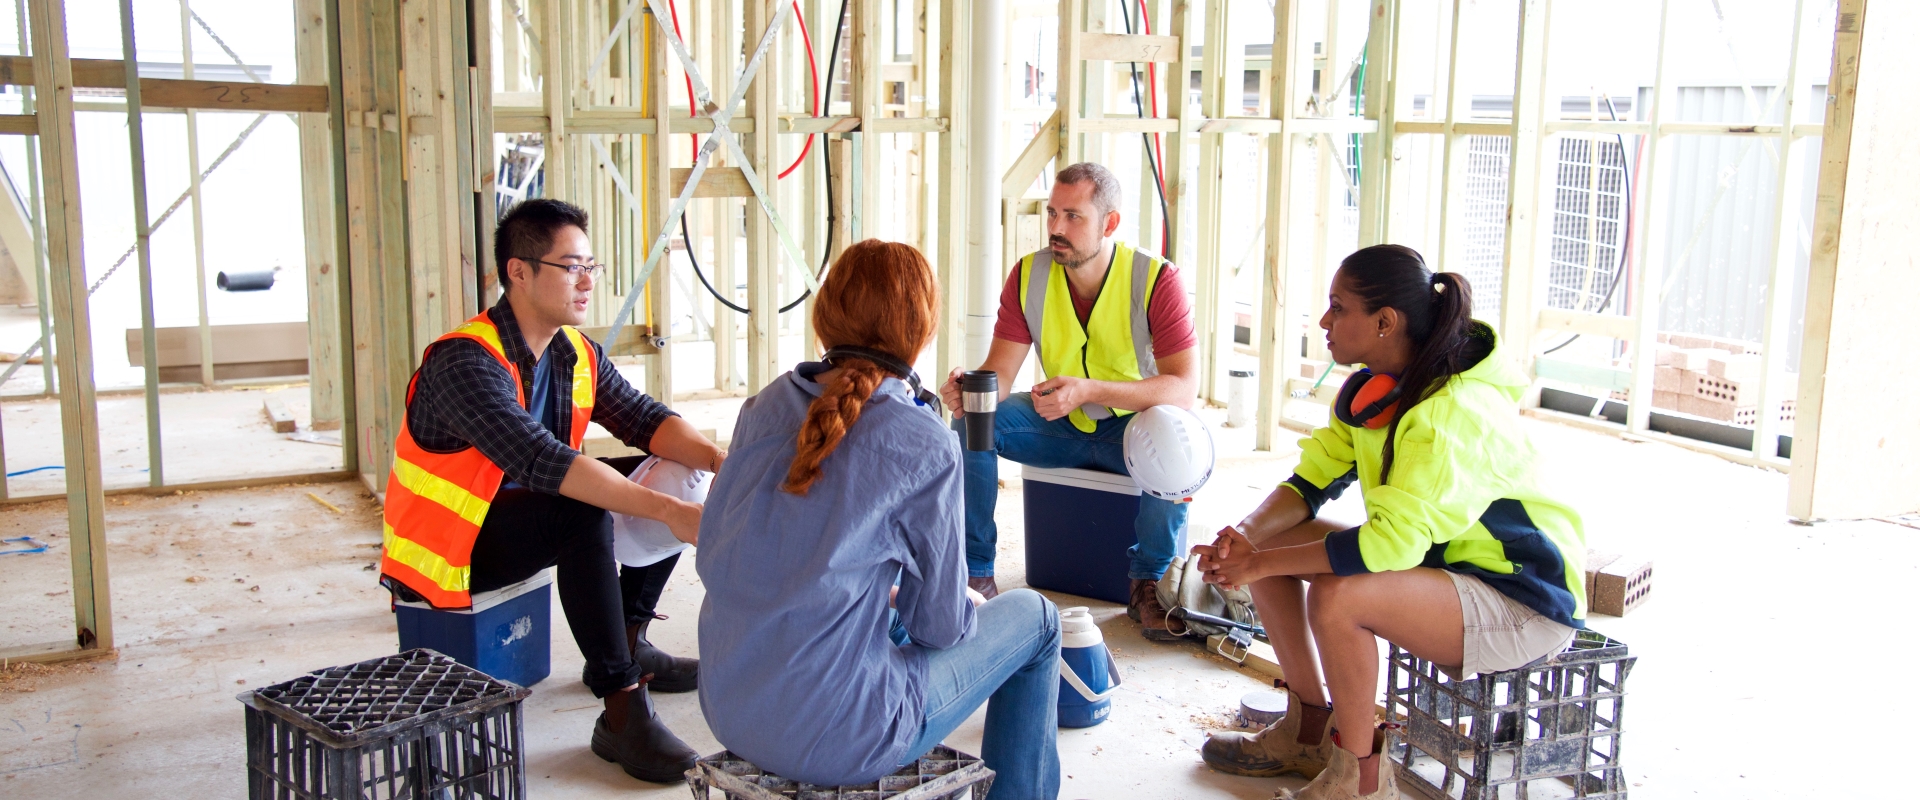 iStock-890101686%20-%20Diverse%20construction%20workers%20meeting%20sitting%20down%20-%201920%20x%20800.jpg